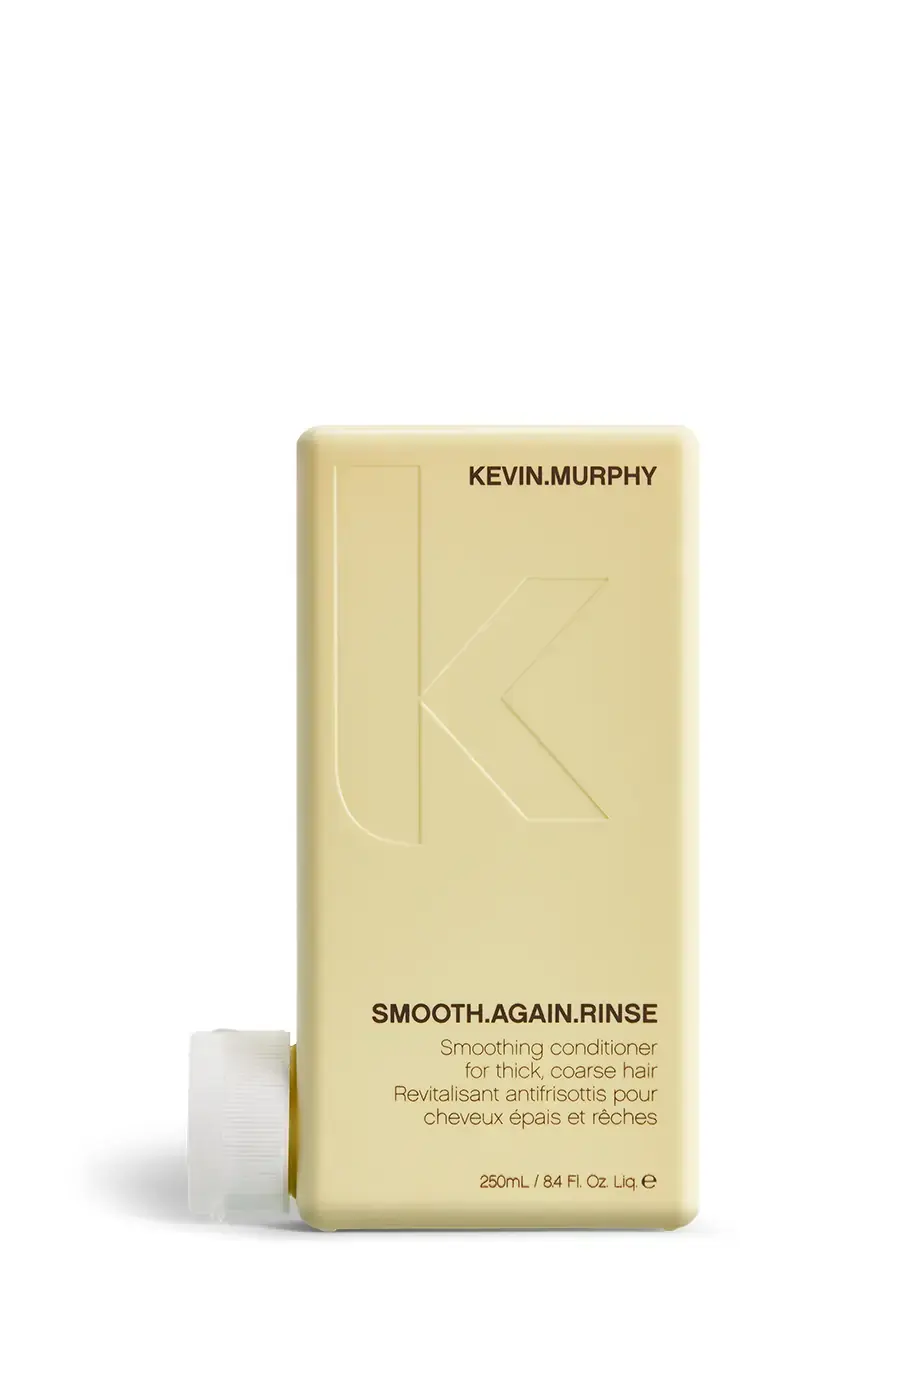 KEVIN.MURPHY smooth.again.rinse